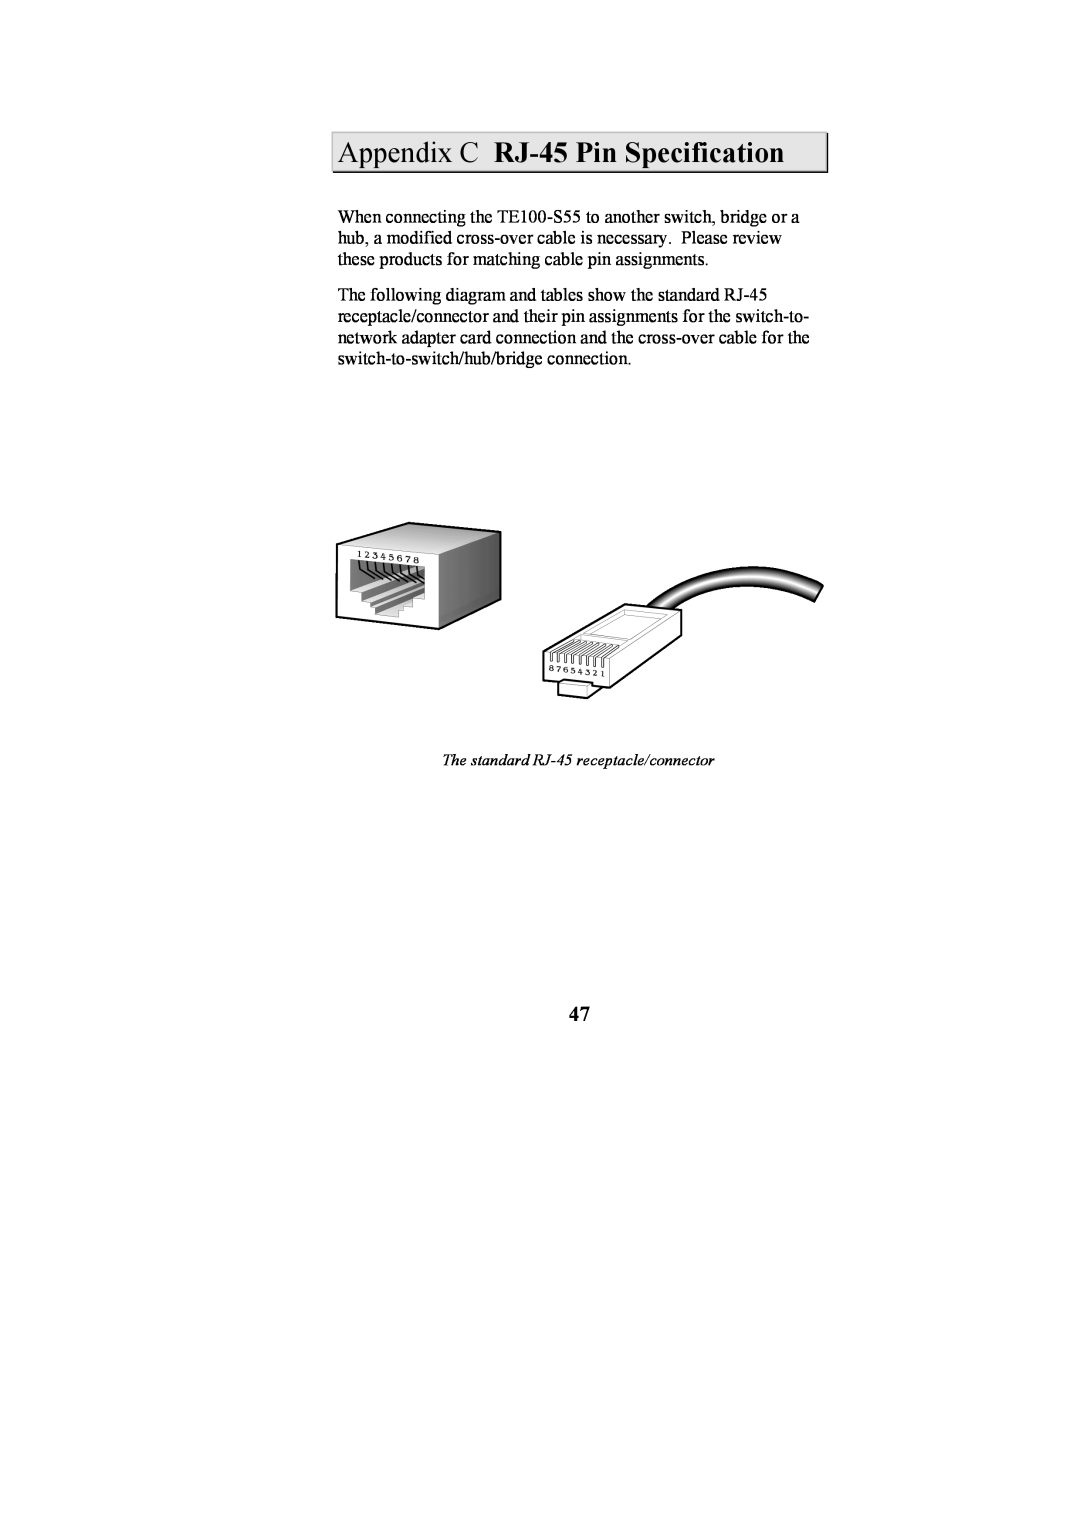 Cables to Go TE100-S55 manual Appendix C RJ-45 Pin Specification, The standard RJ-45 receptacle/connector 